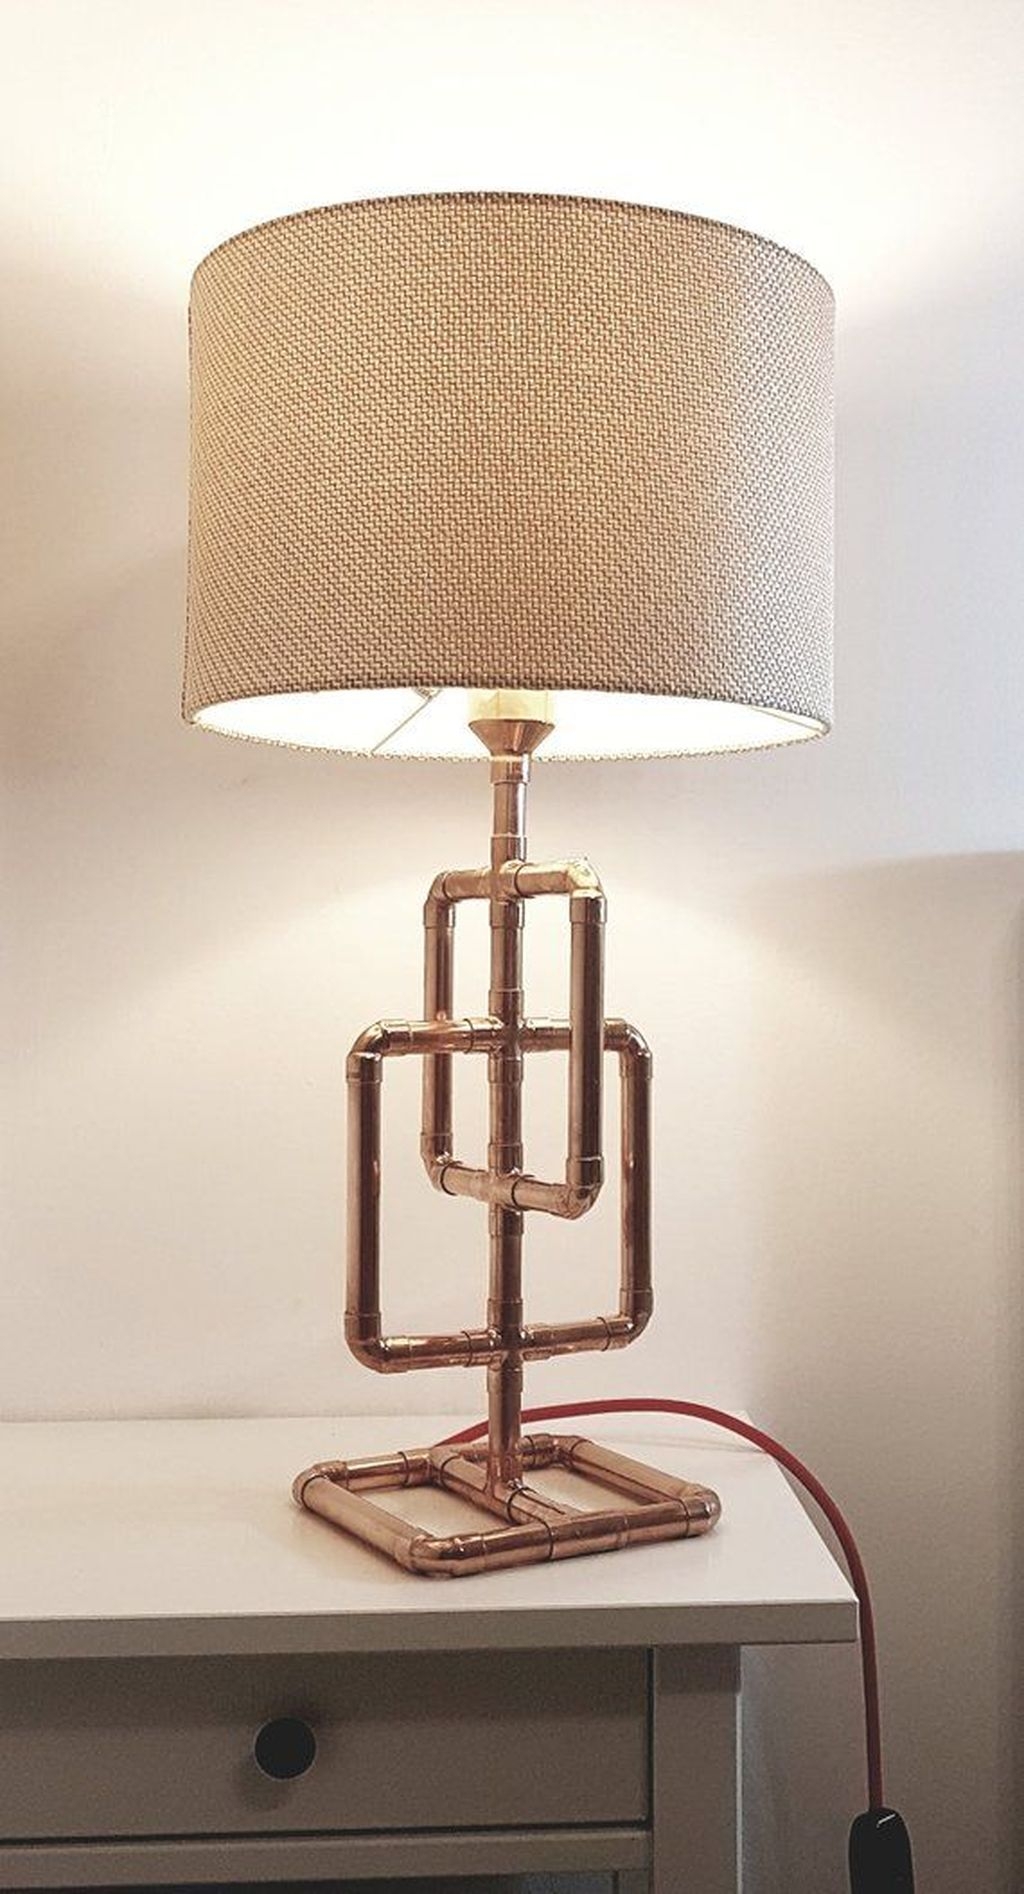 Awesome Table Lamp Ideas To Brighten Up Your Work Space 49